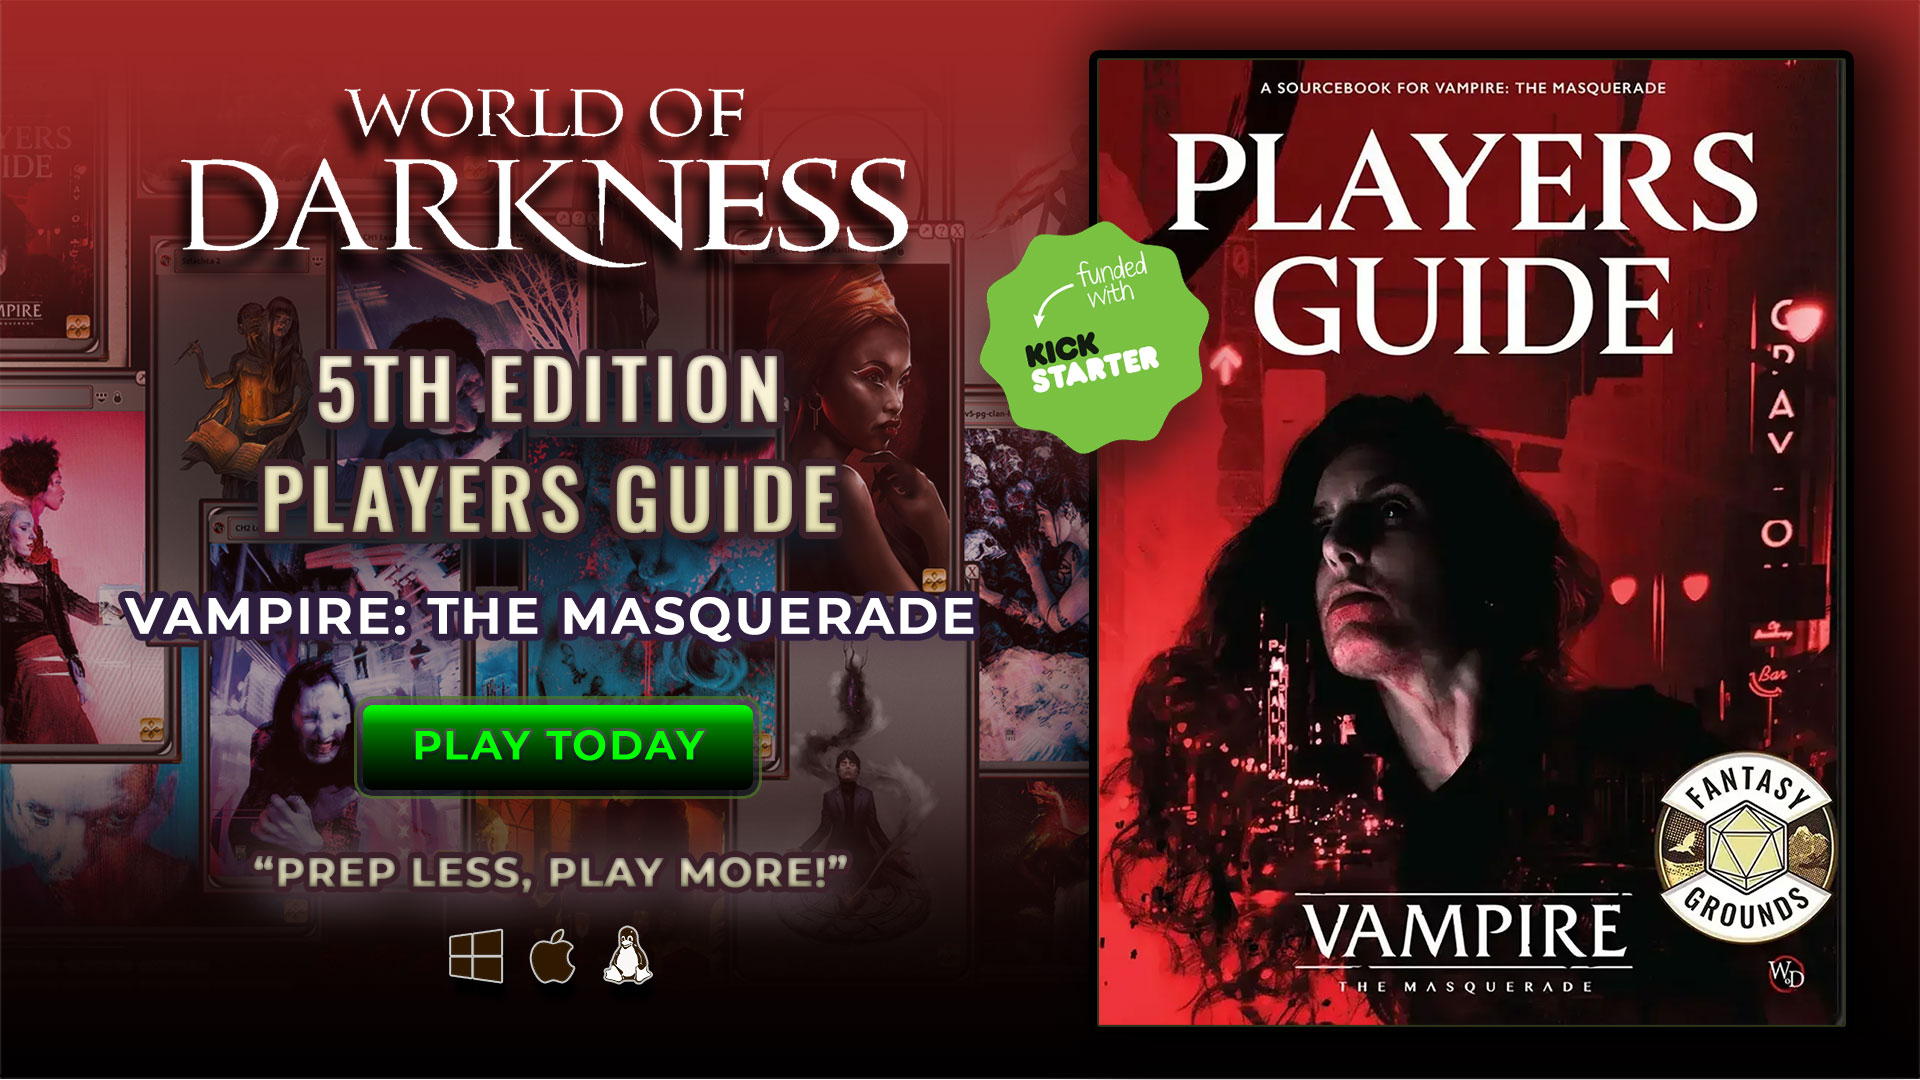 Vampire The Masquerade Roleplaying Game 5th Edition Players Guide (WOD5ERGS01133).jpg